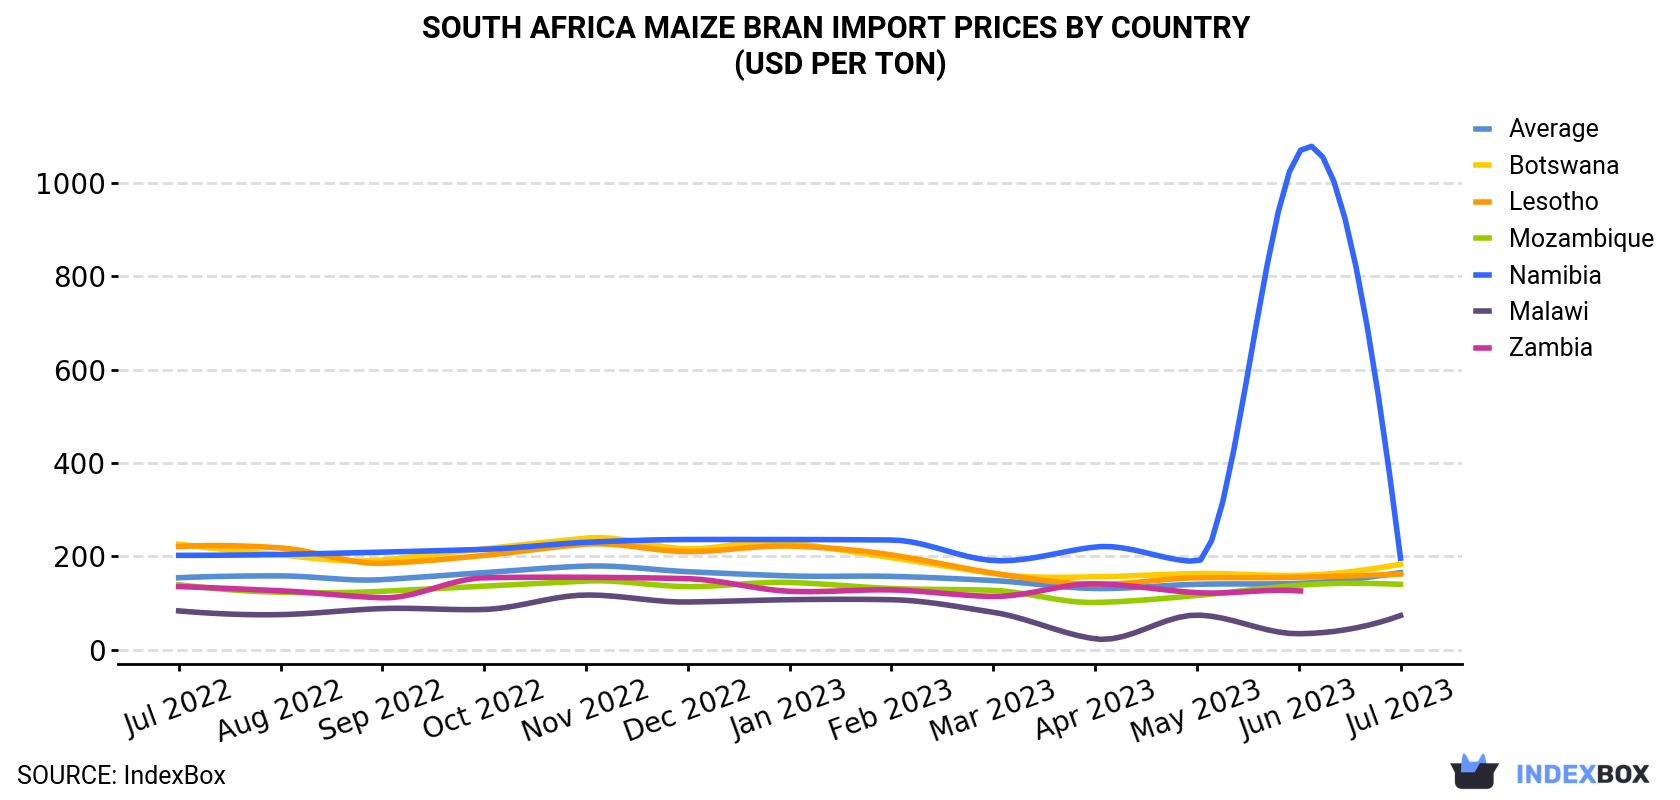 South Africa Maize Bran Import Prices By Country (USD Per Ton)